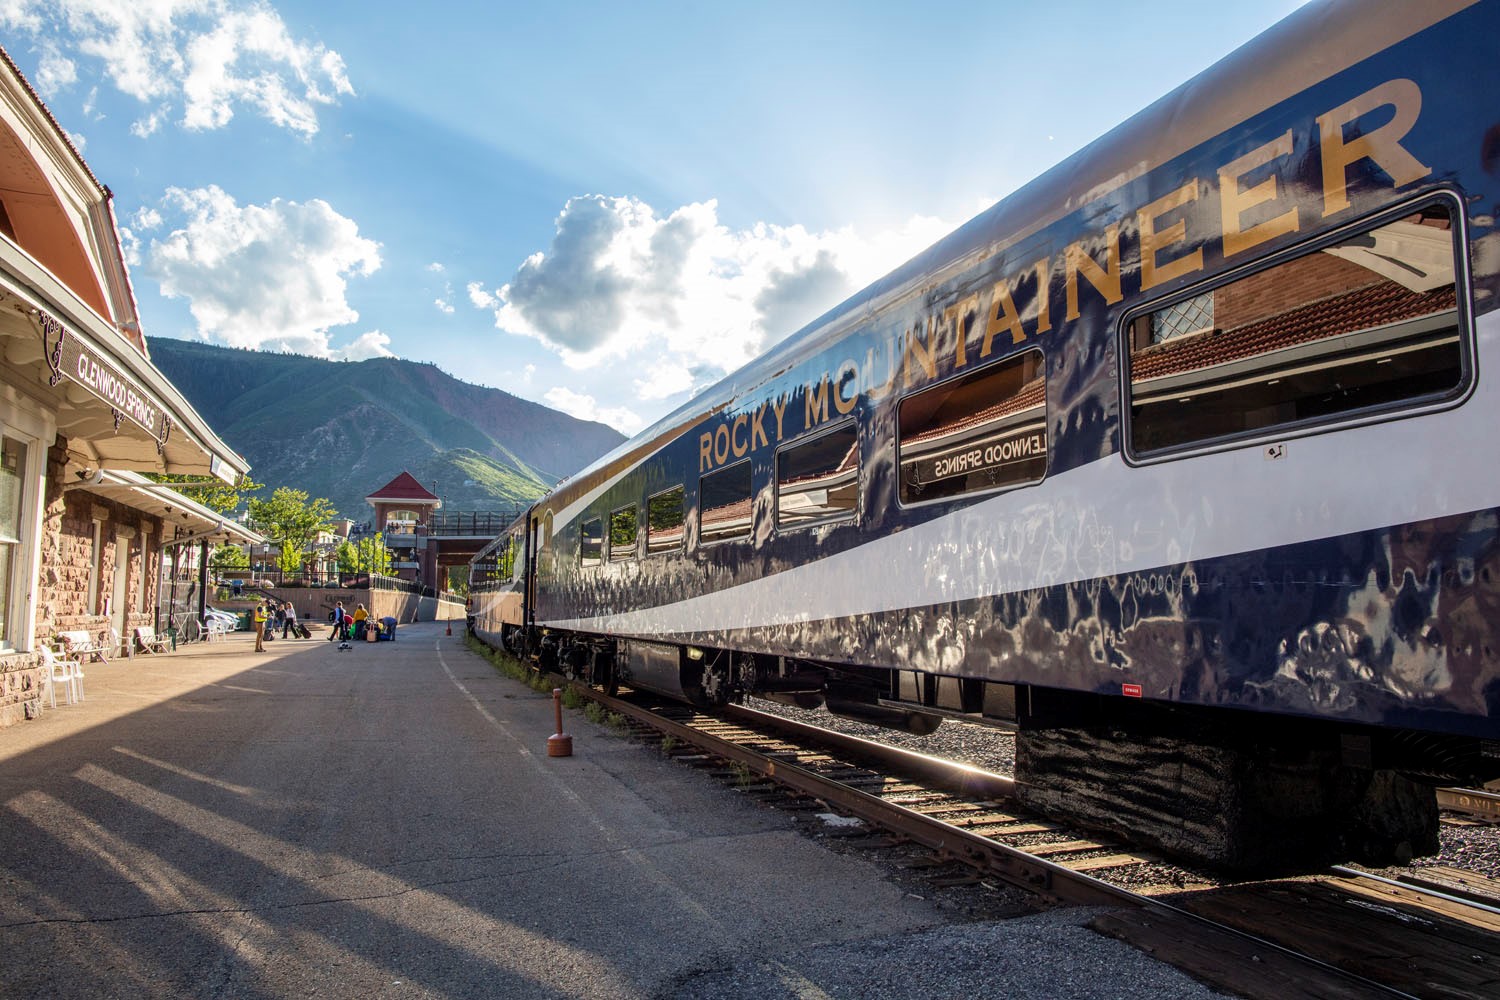 Rocky Mountaineer arrives at the Glenwood Springs train station. 
Photo Credit: Emotion Cinema